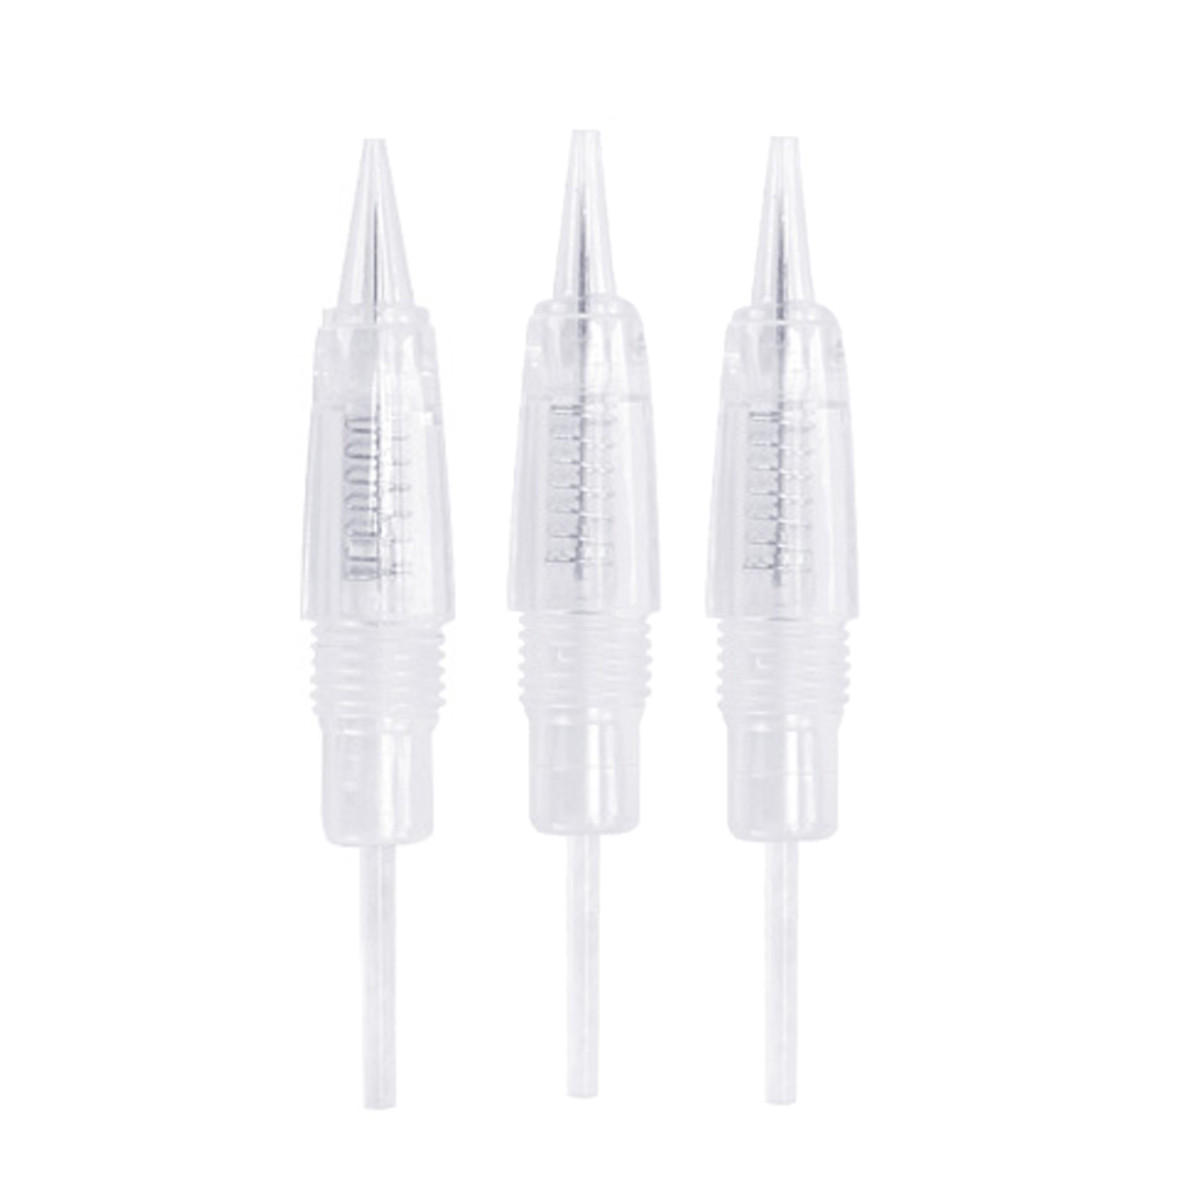 Permanent Tattoo Needle Cartridges Makeup Liner Shaders For Charmant Machine, Banggood  - buy with discount